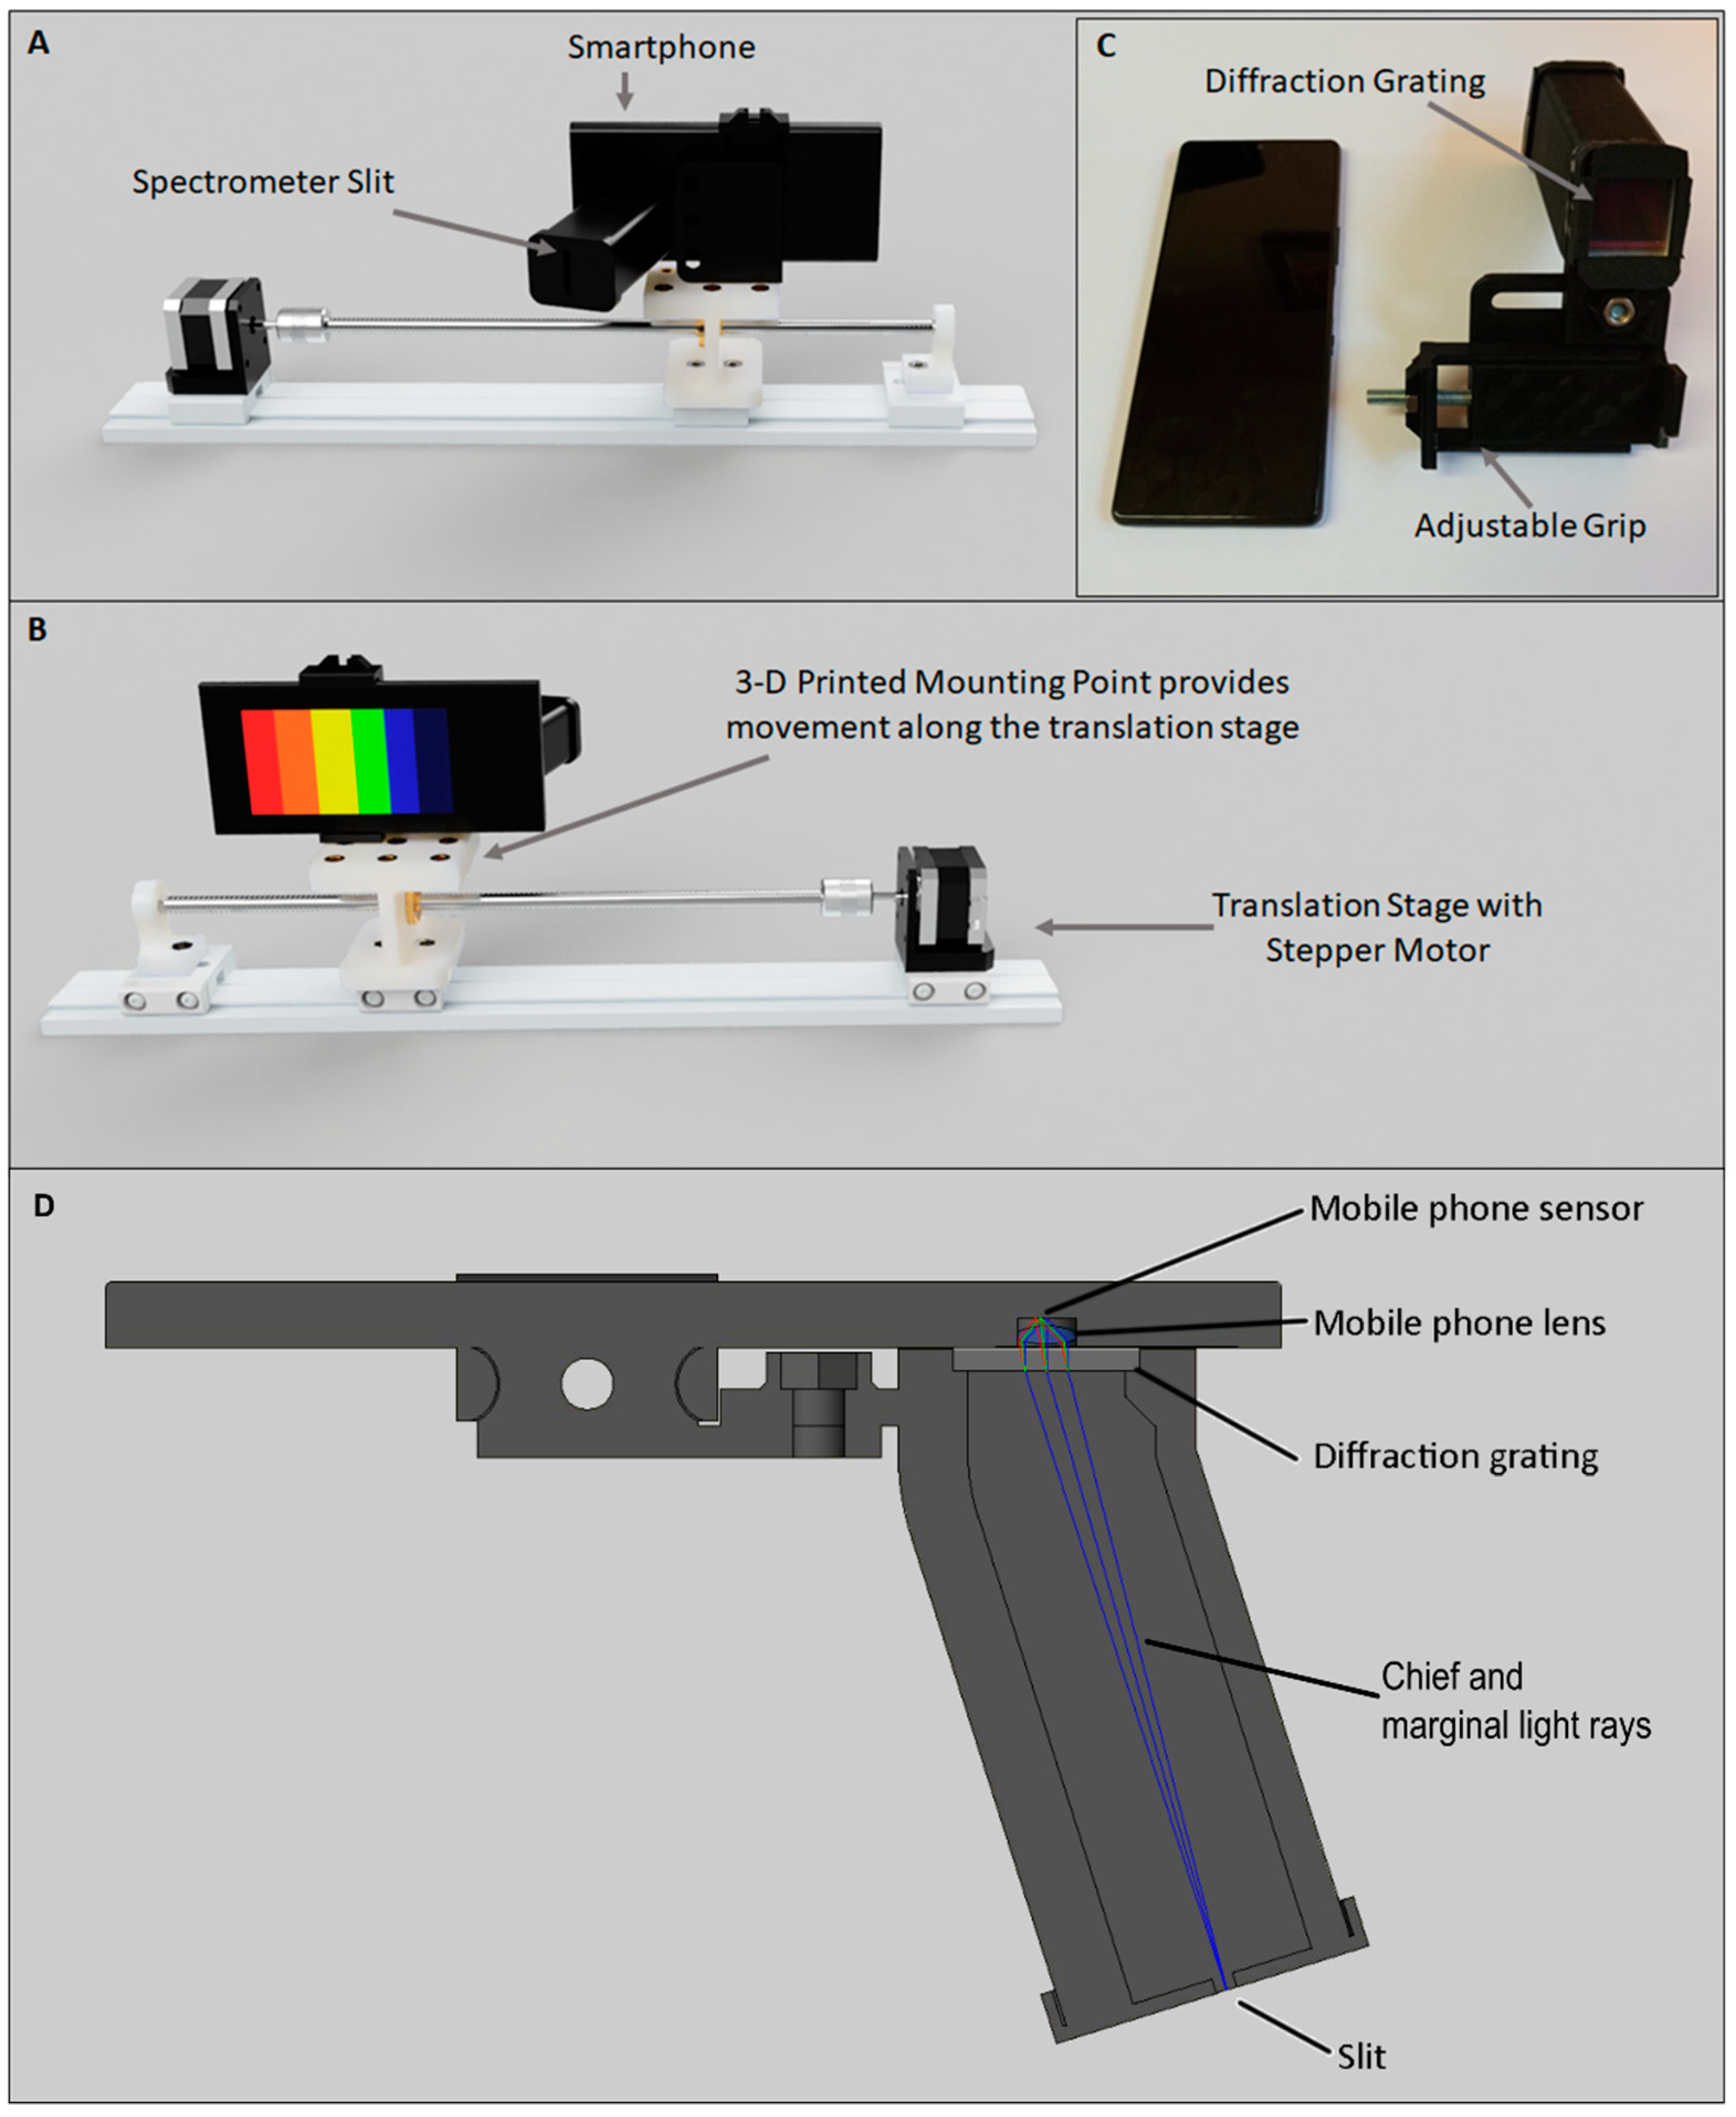 J. Imaging | Free Full-Text | Low-Cost Hyperspectral Imaging with A  Smartphone